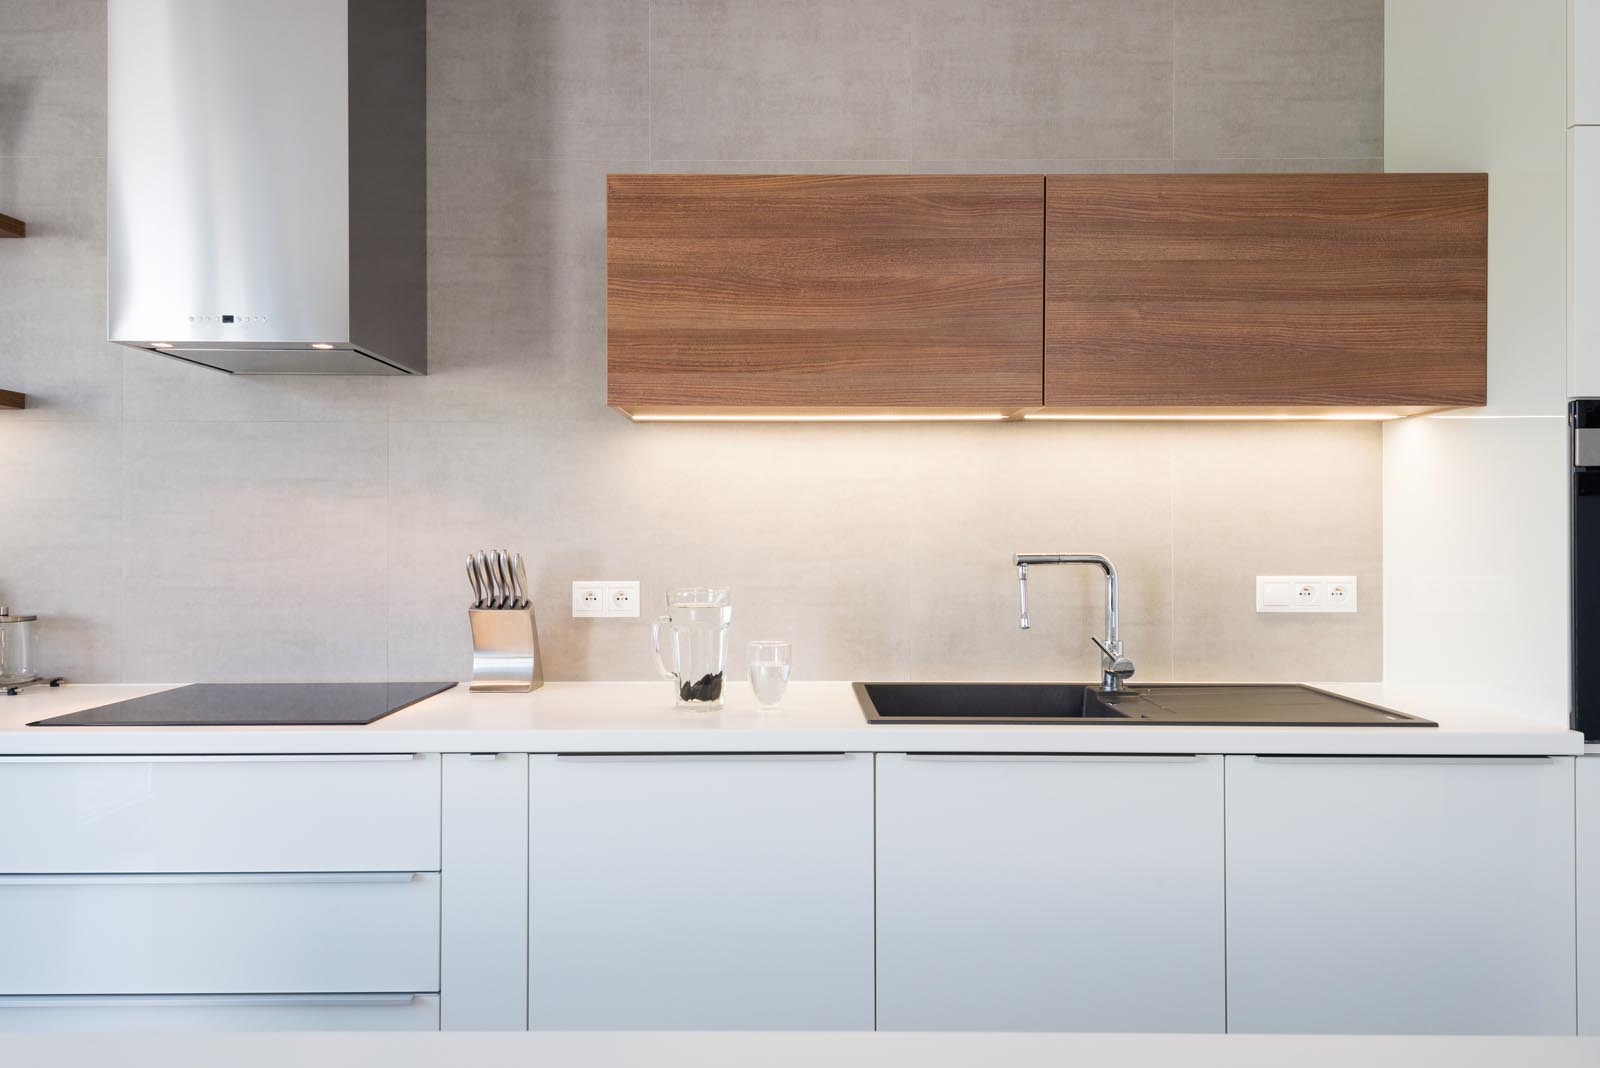 Lighting Tips for a Functional Kitchen